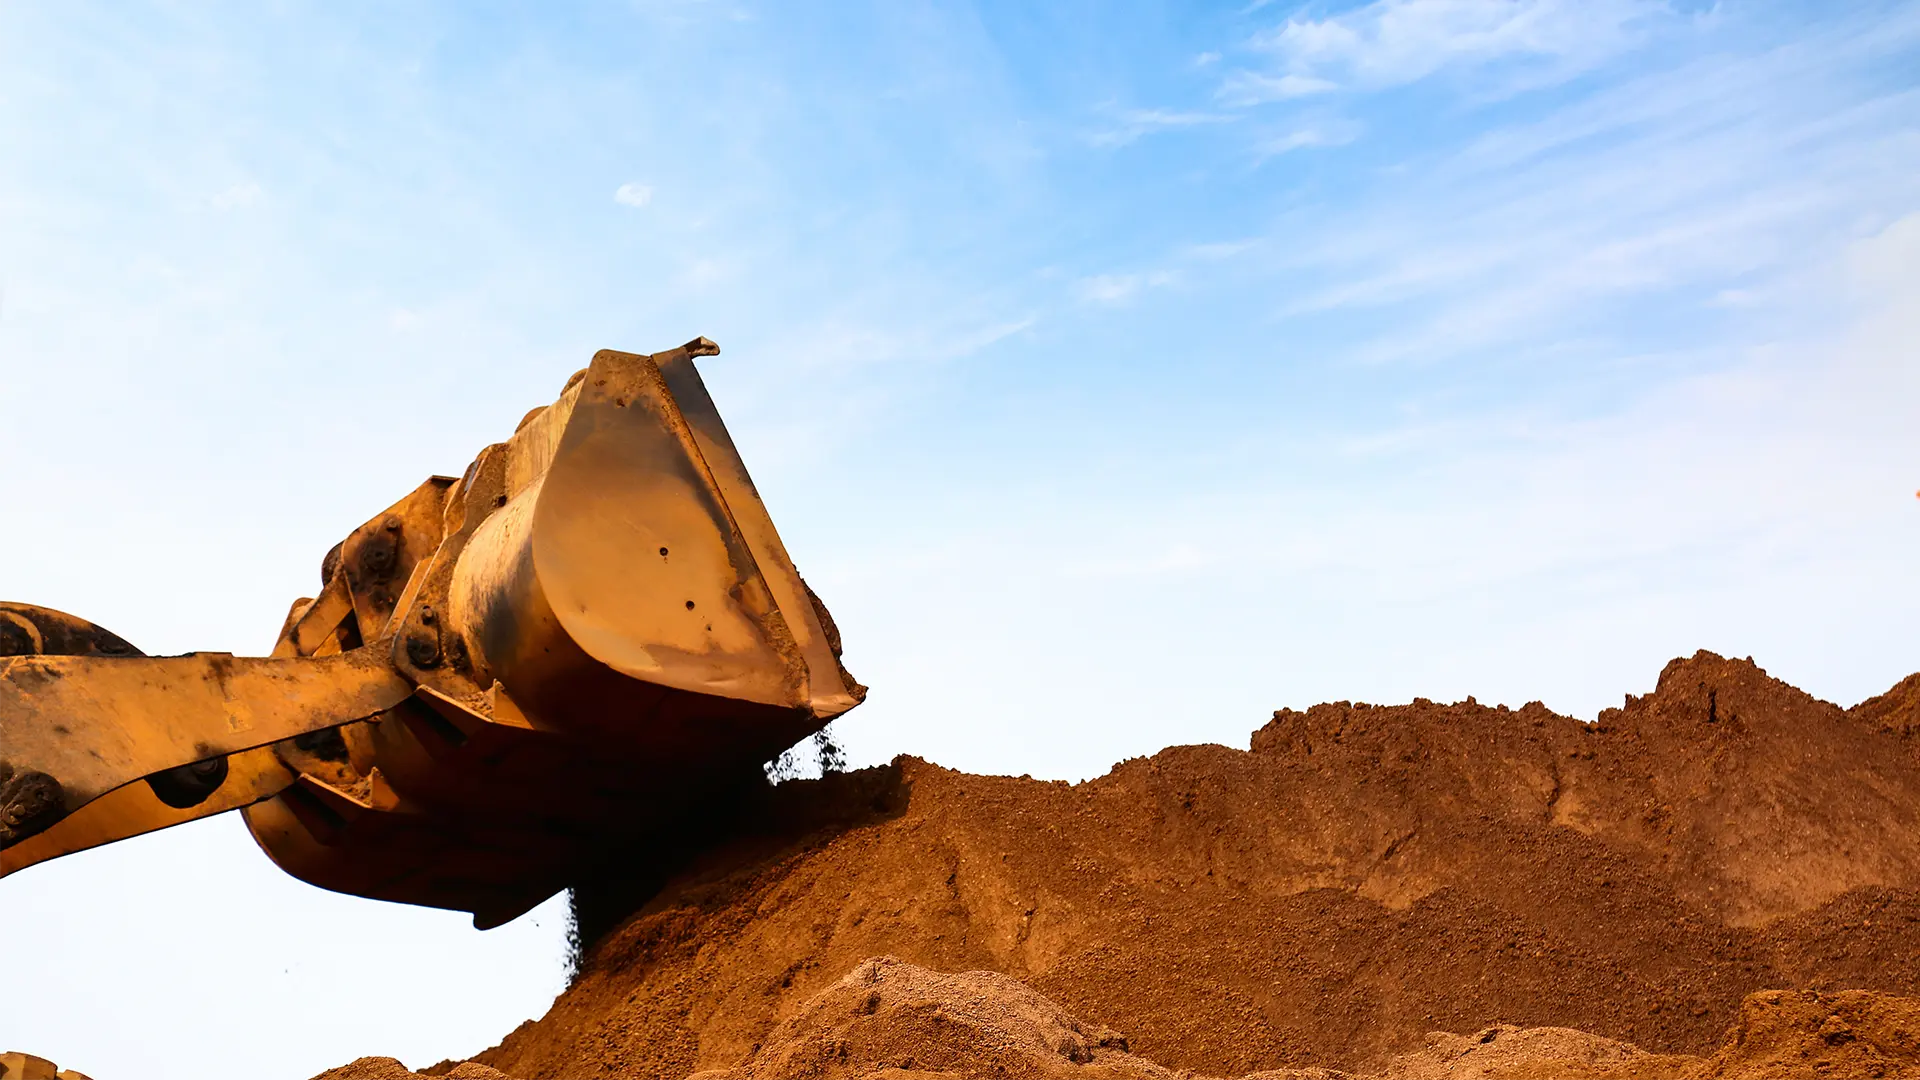 Vale International enters into a LOI for Supplying Iron Ore Agglomerates to Essar Group’s KSA Green Steel Project